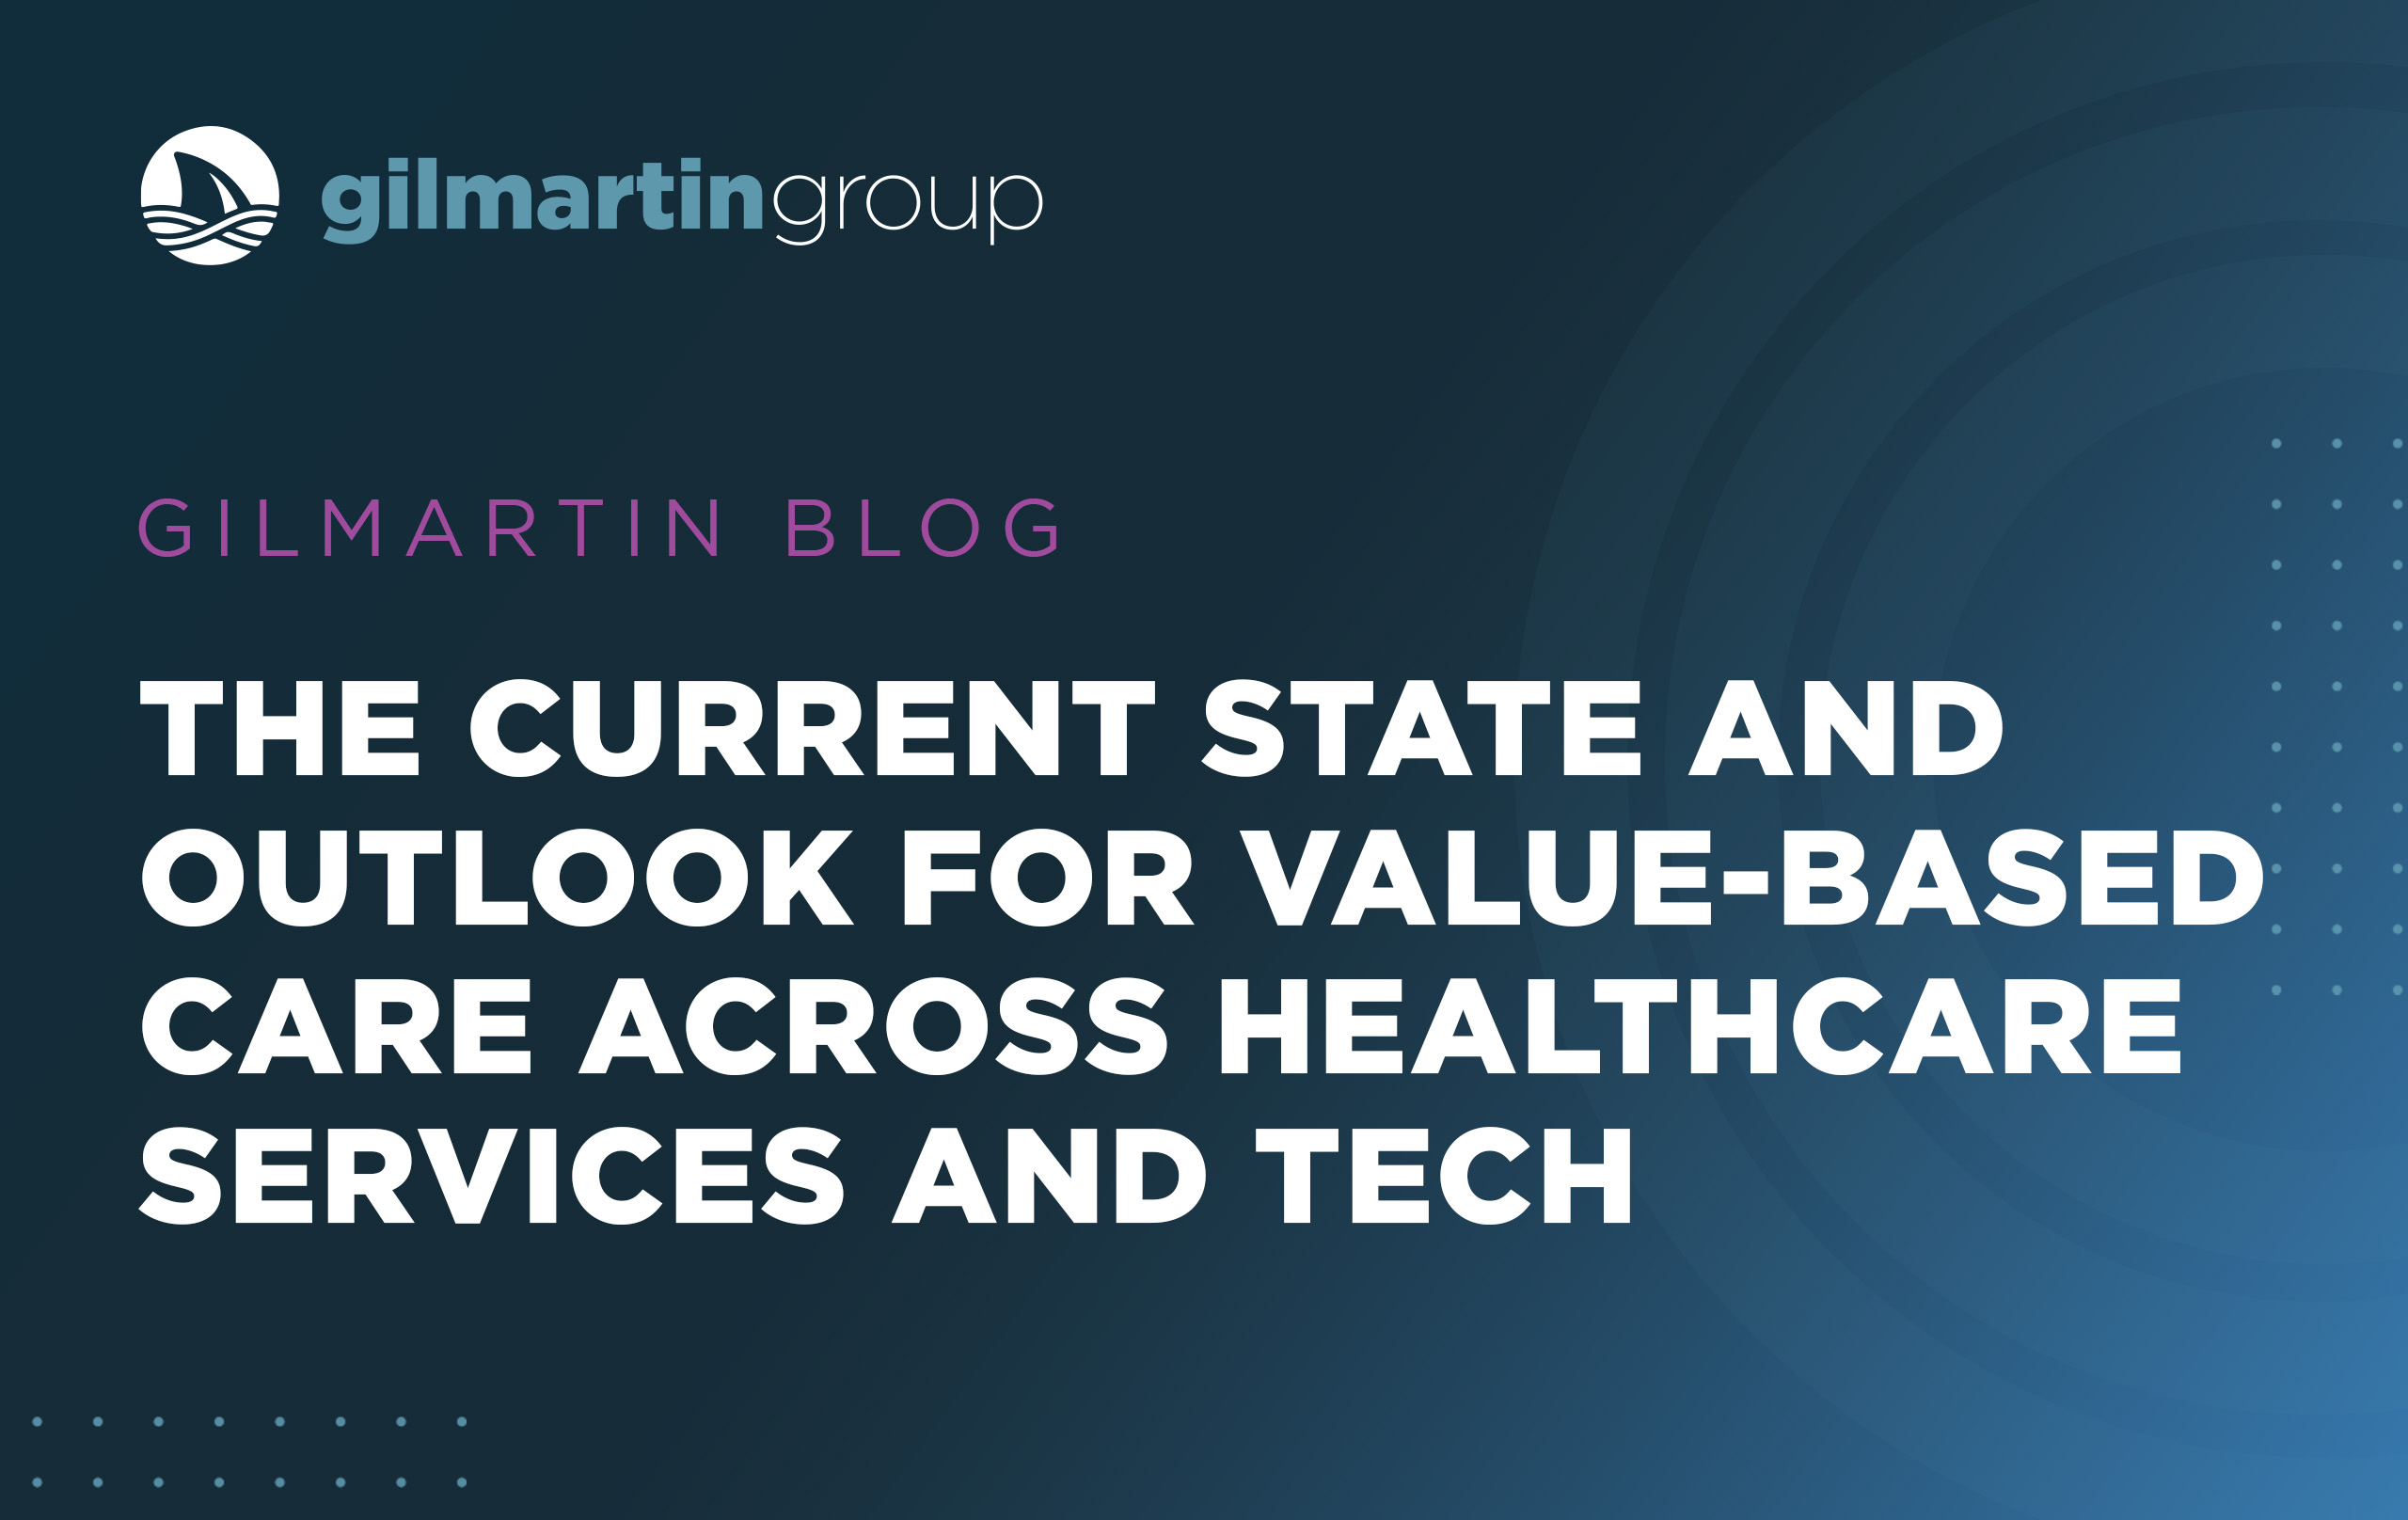 image for The Current State and Outlook for Value-Based Care Across Healthcare Services and Tech